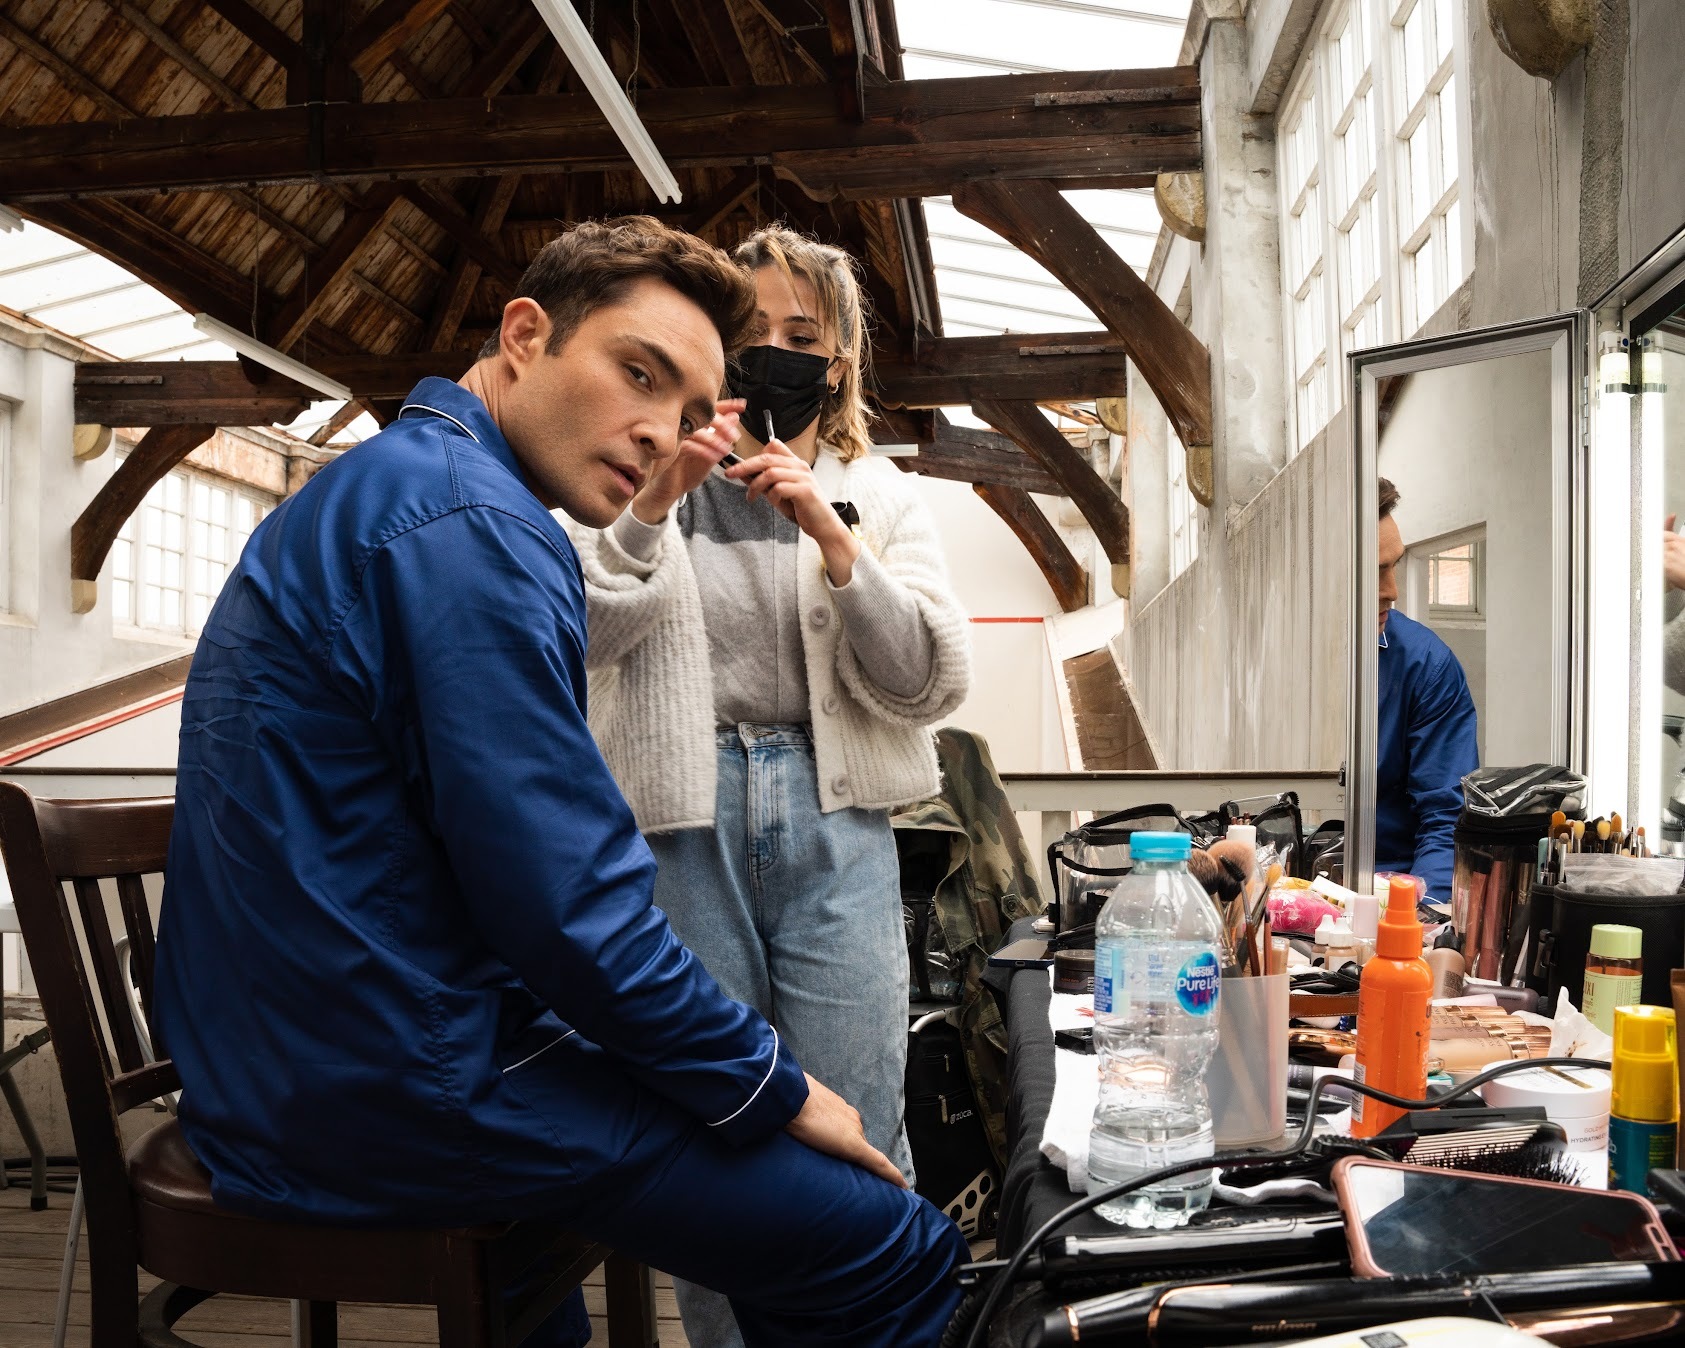 Ed Westwick preparing for filming with Shares